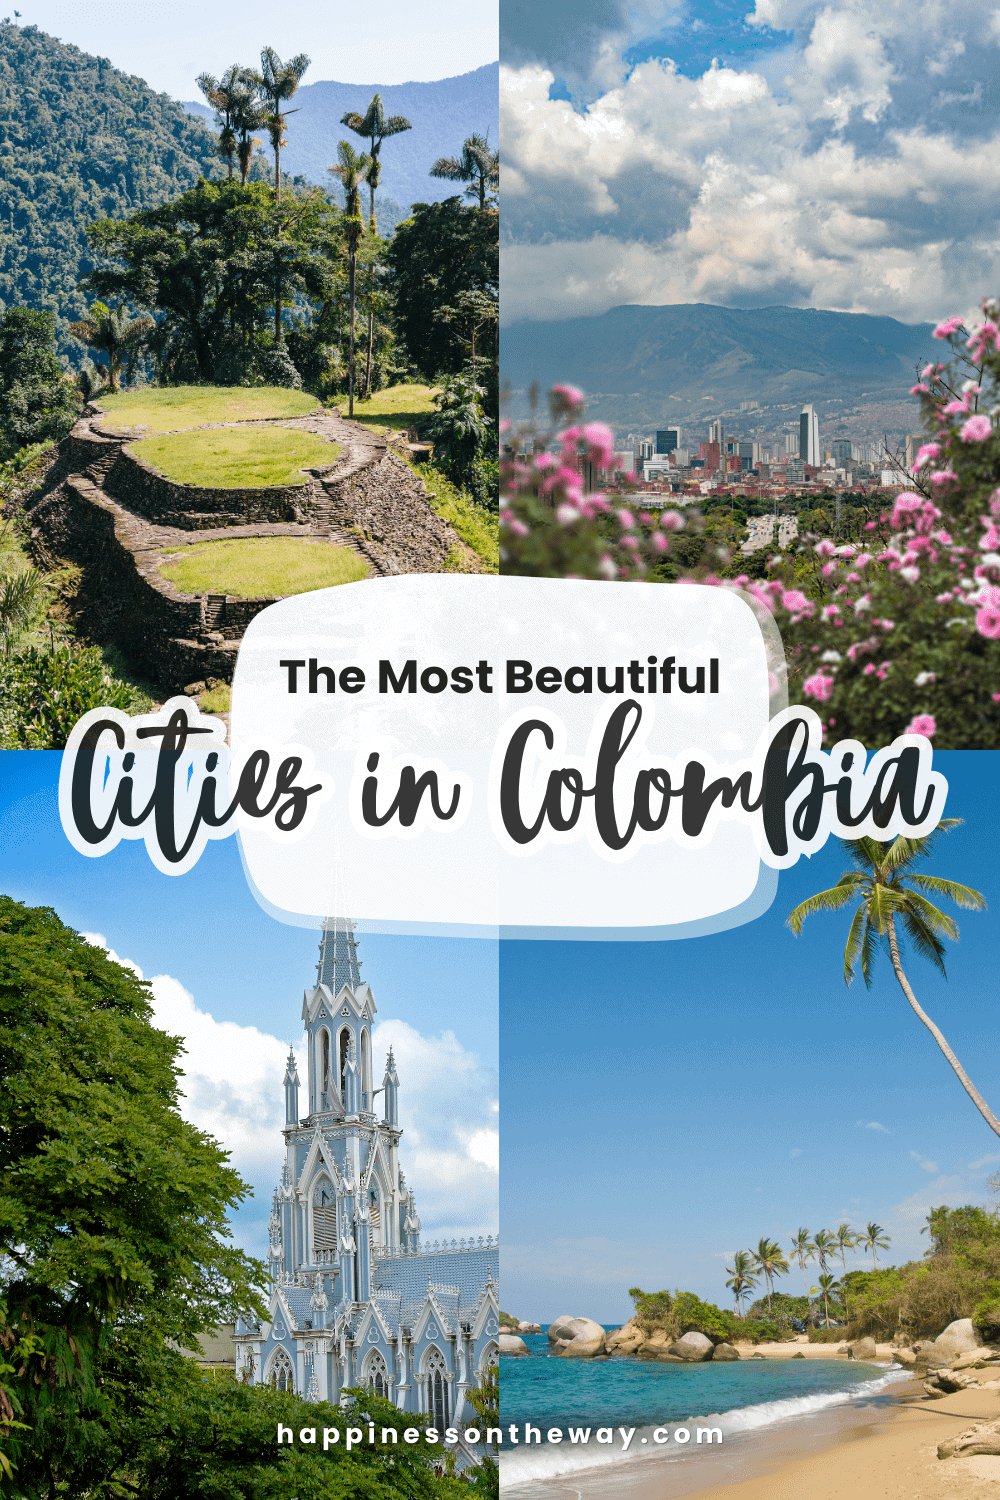 The Beautiful Cities in Colombia